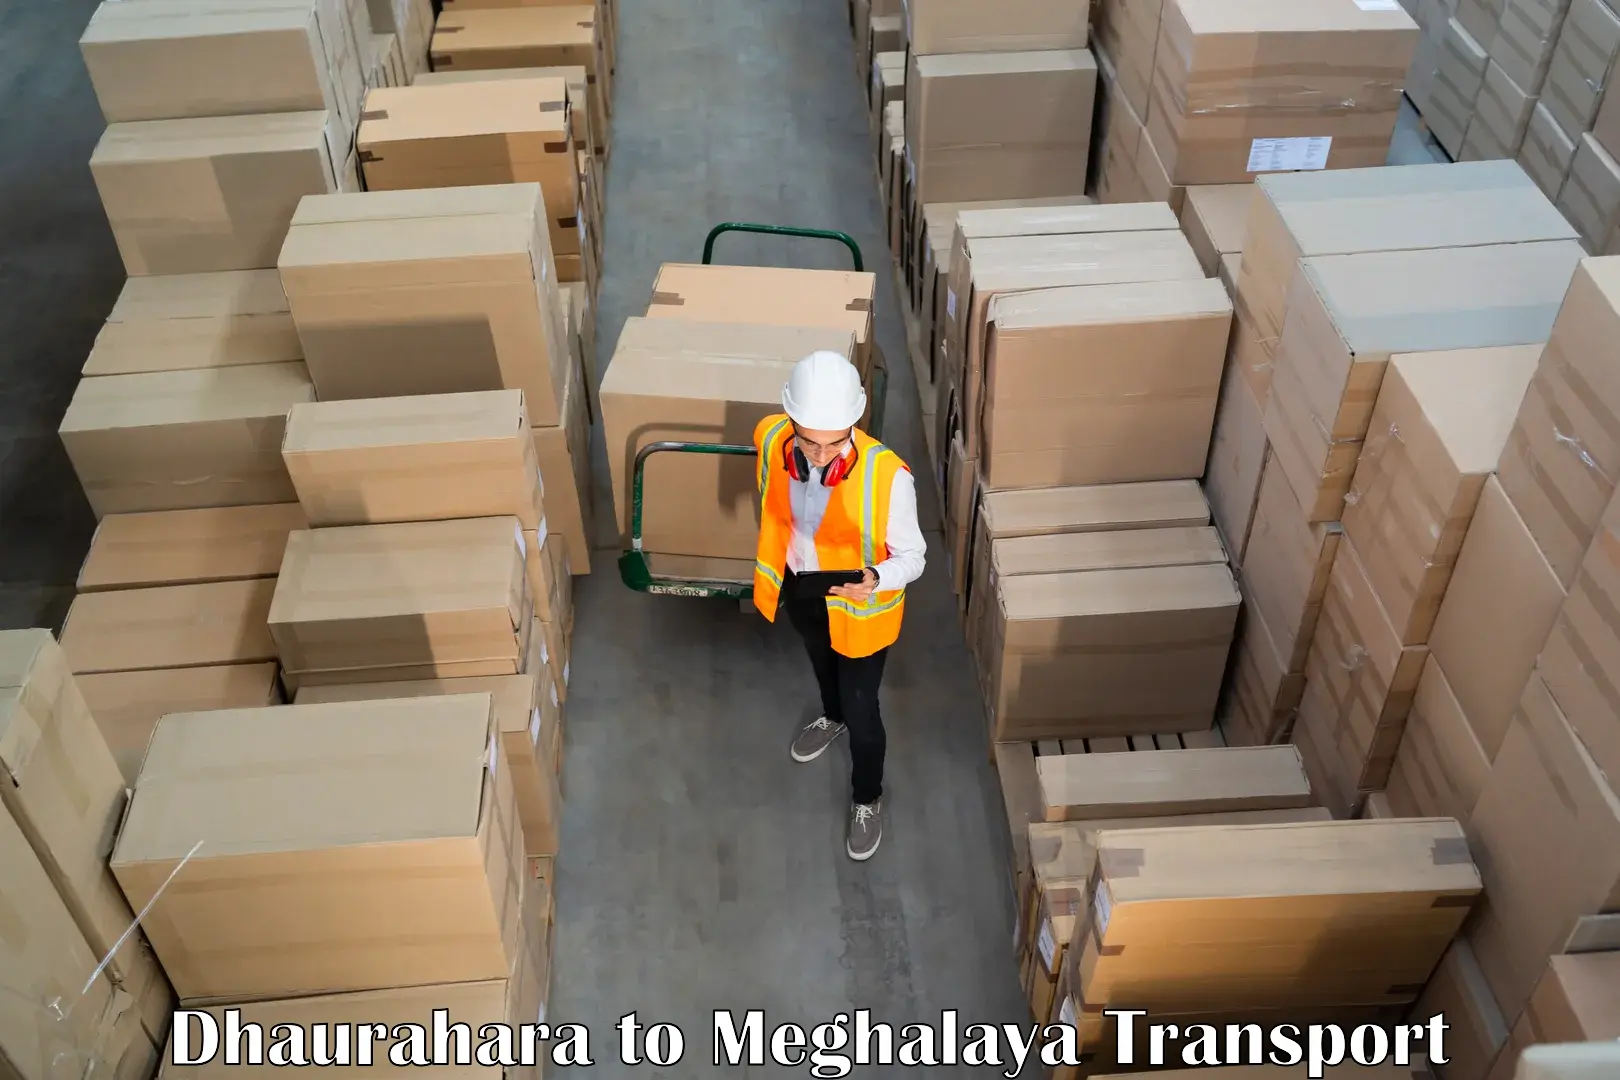 Cargo transport services in Dhaurahara to Shillong